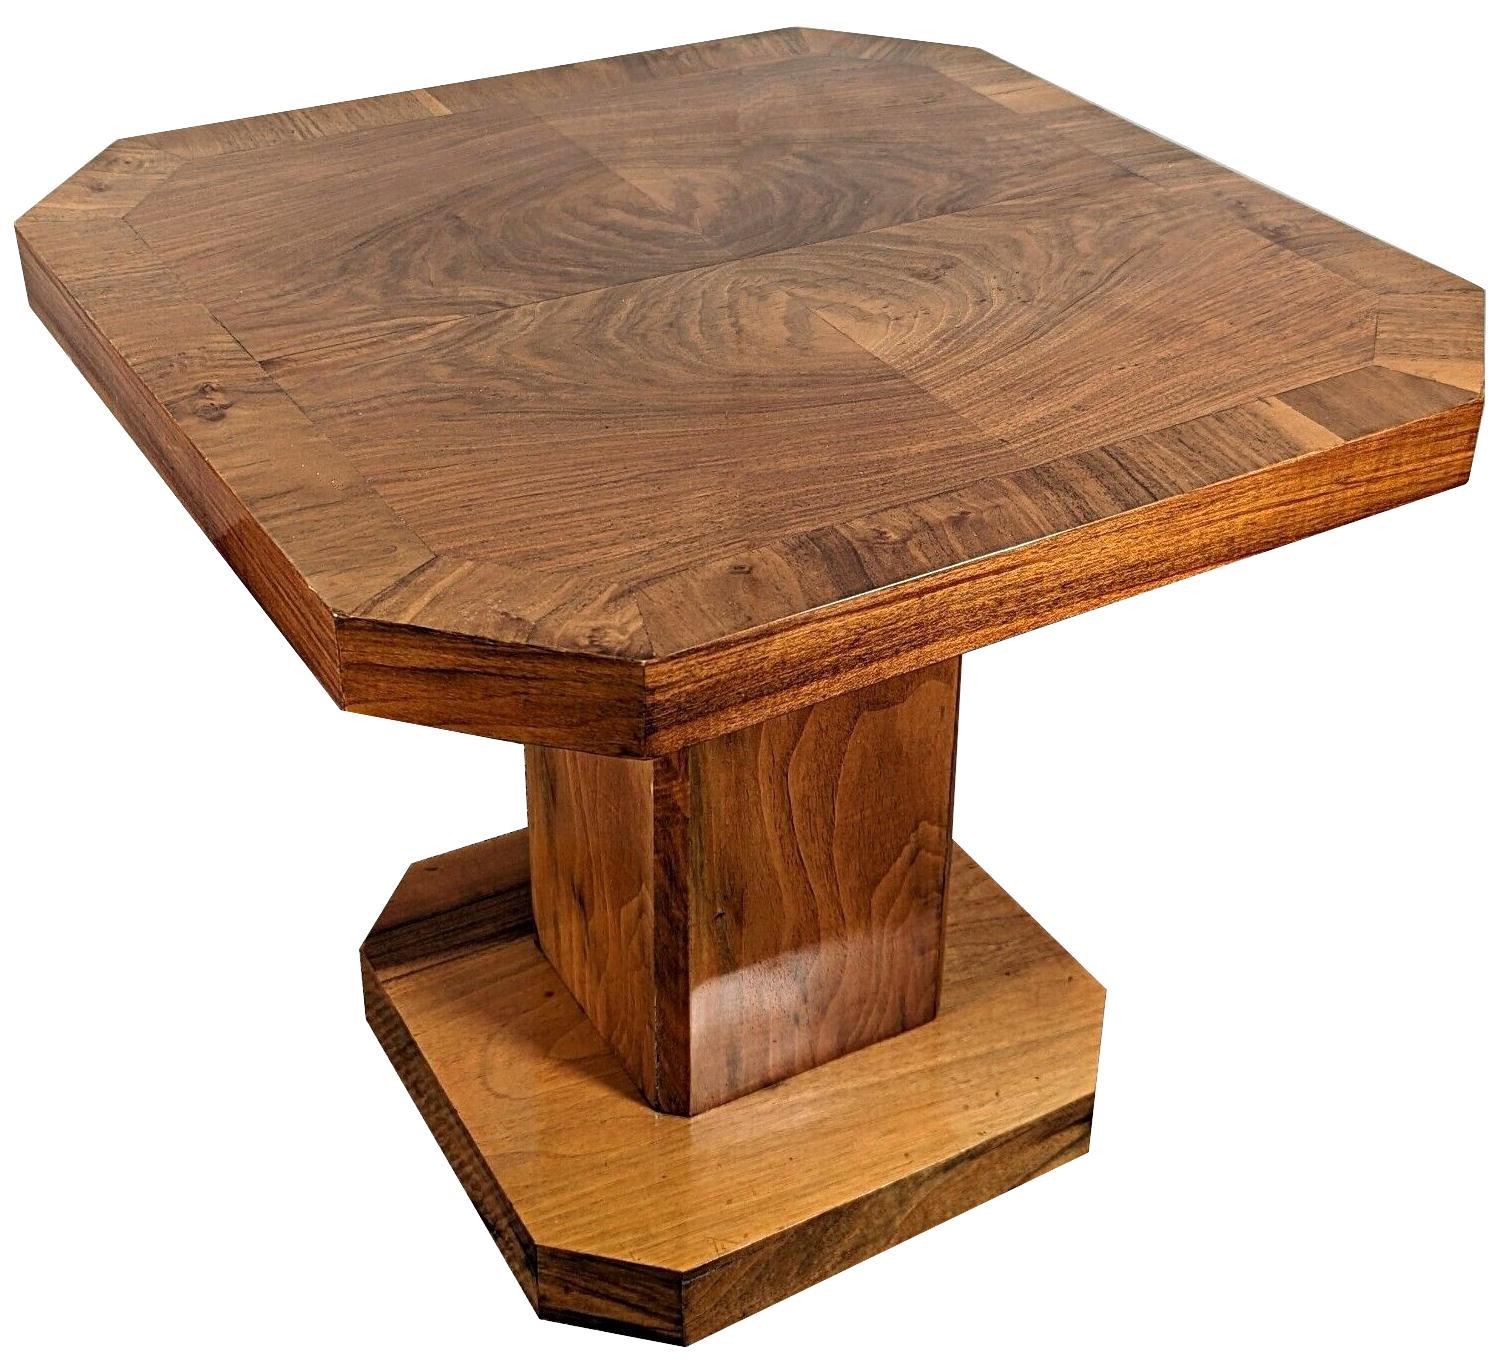 Fabulous and totally original 1930s Art Deco walnut occasional table originating from England, UK. This table is ideal for modern day use either as a coffee table or center table. The veneers are an absolute delight with figuring on every angle, the